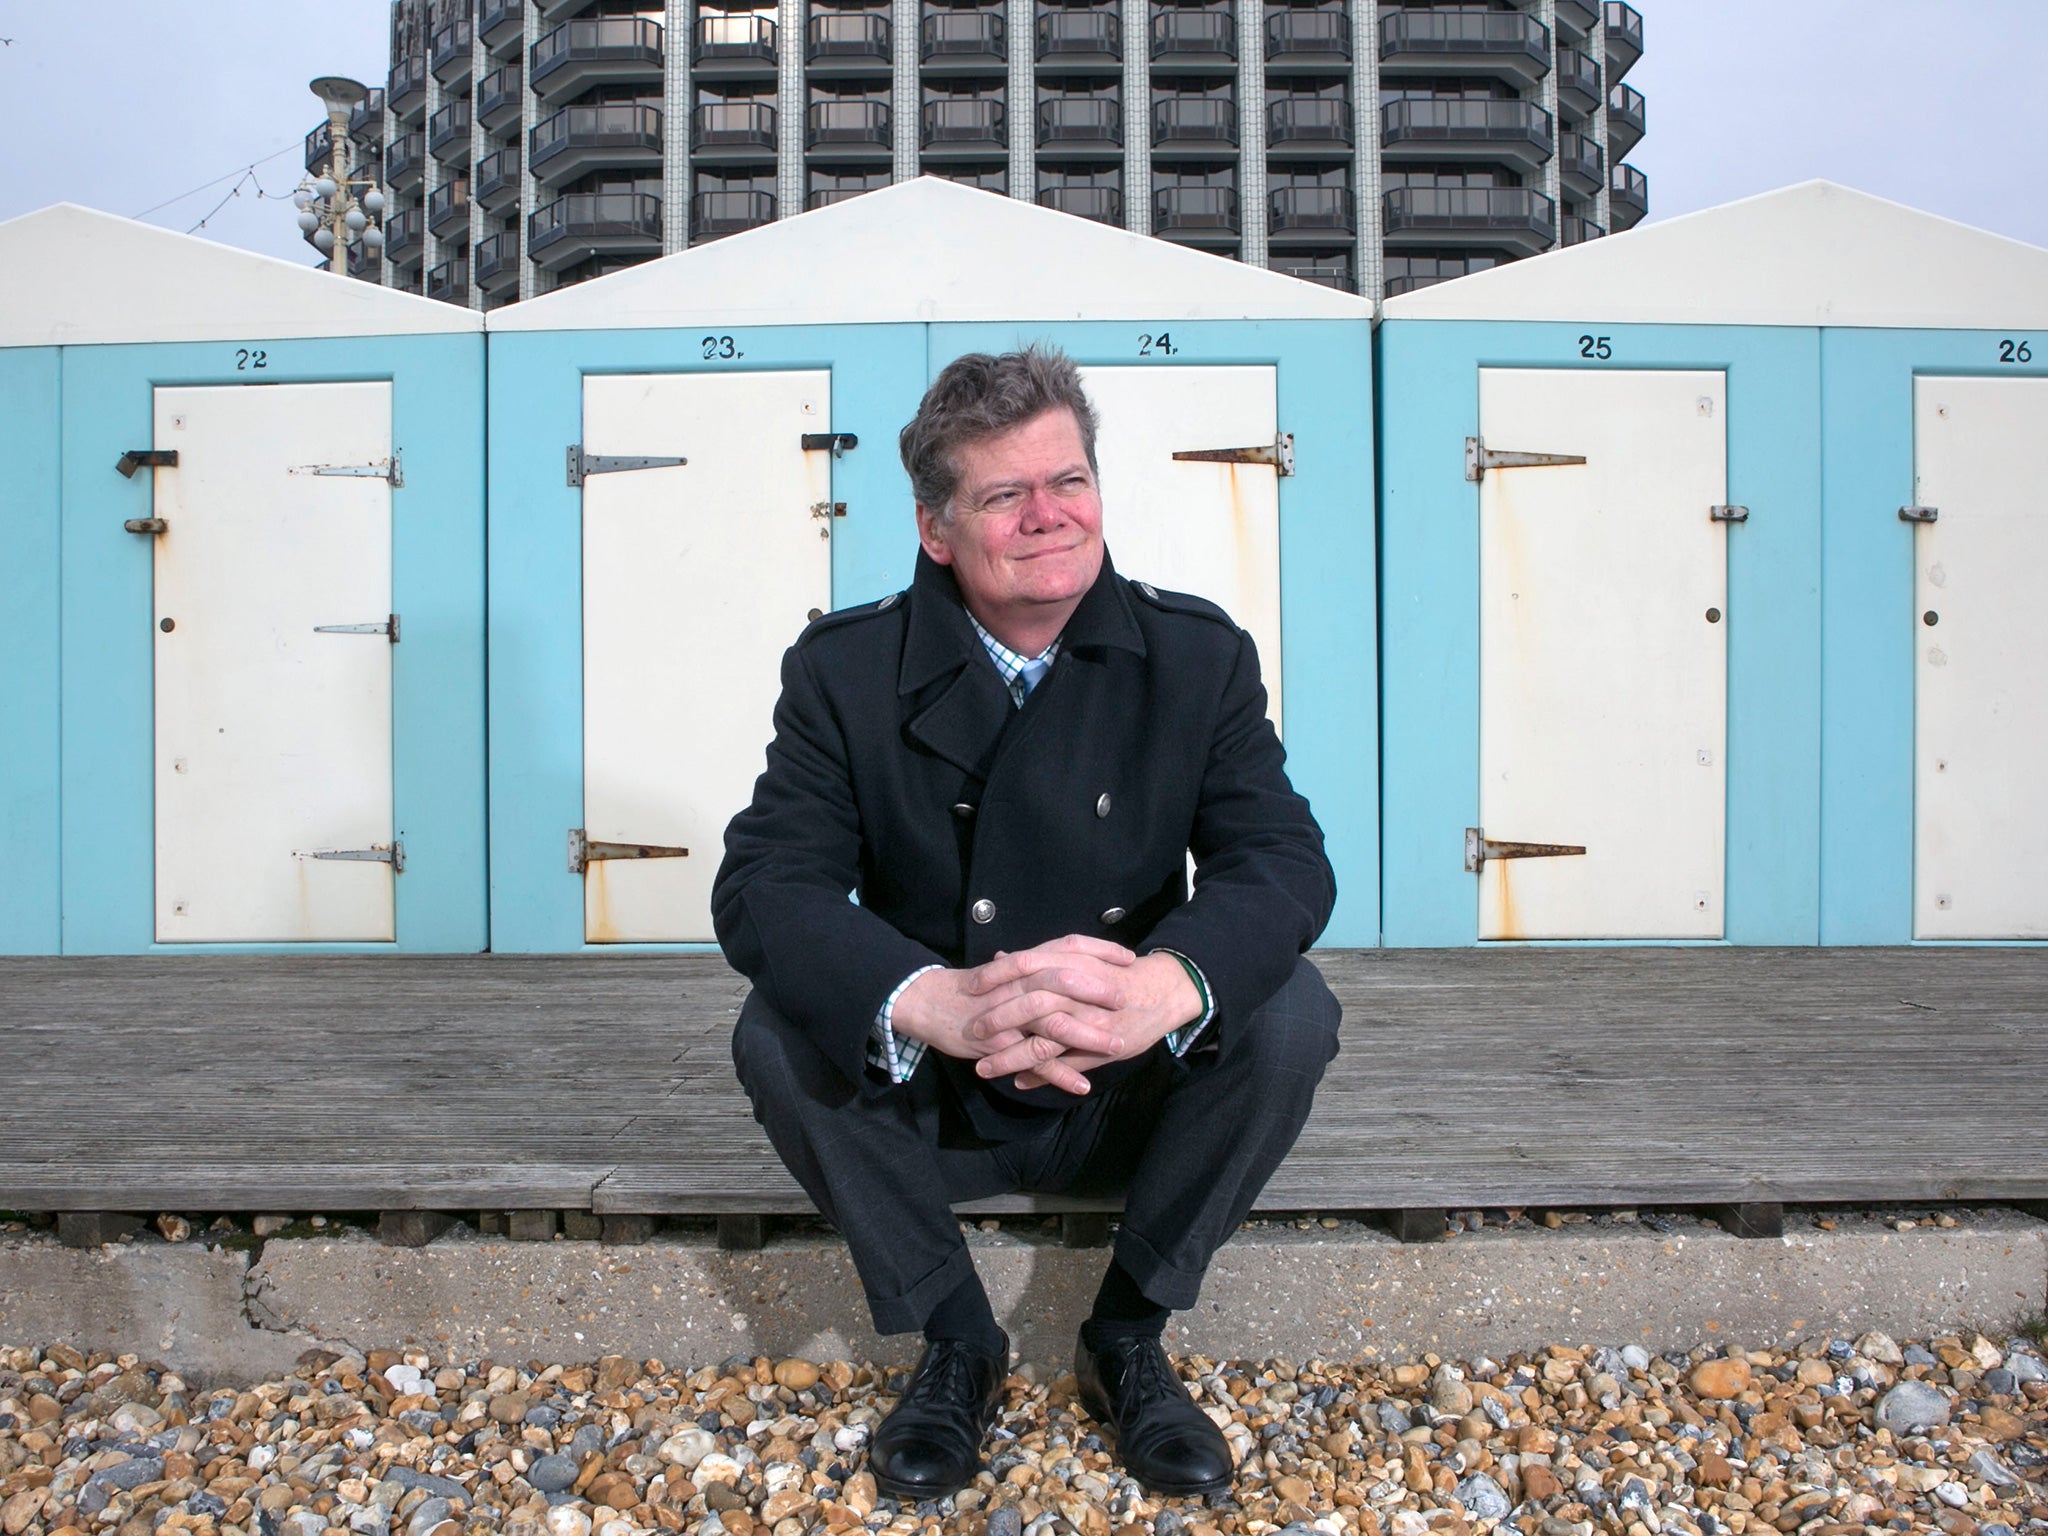 Stephen Lloyd won Eastbourne at the last election by drawing anti-Tory votes